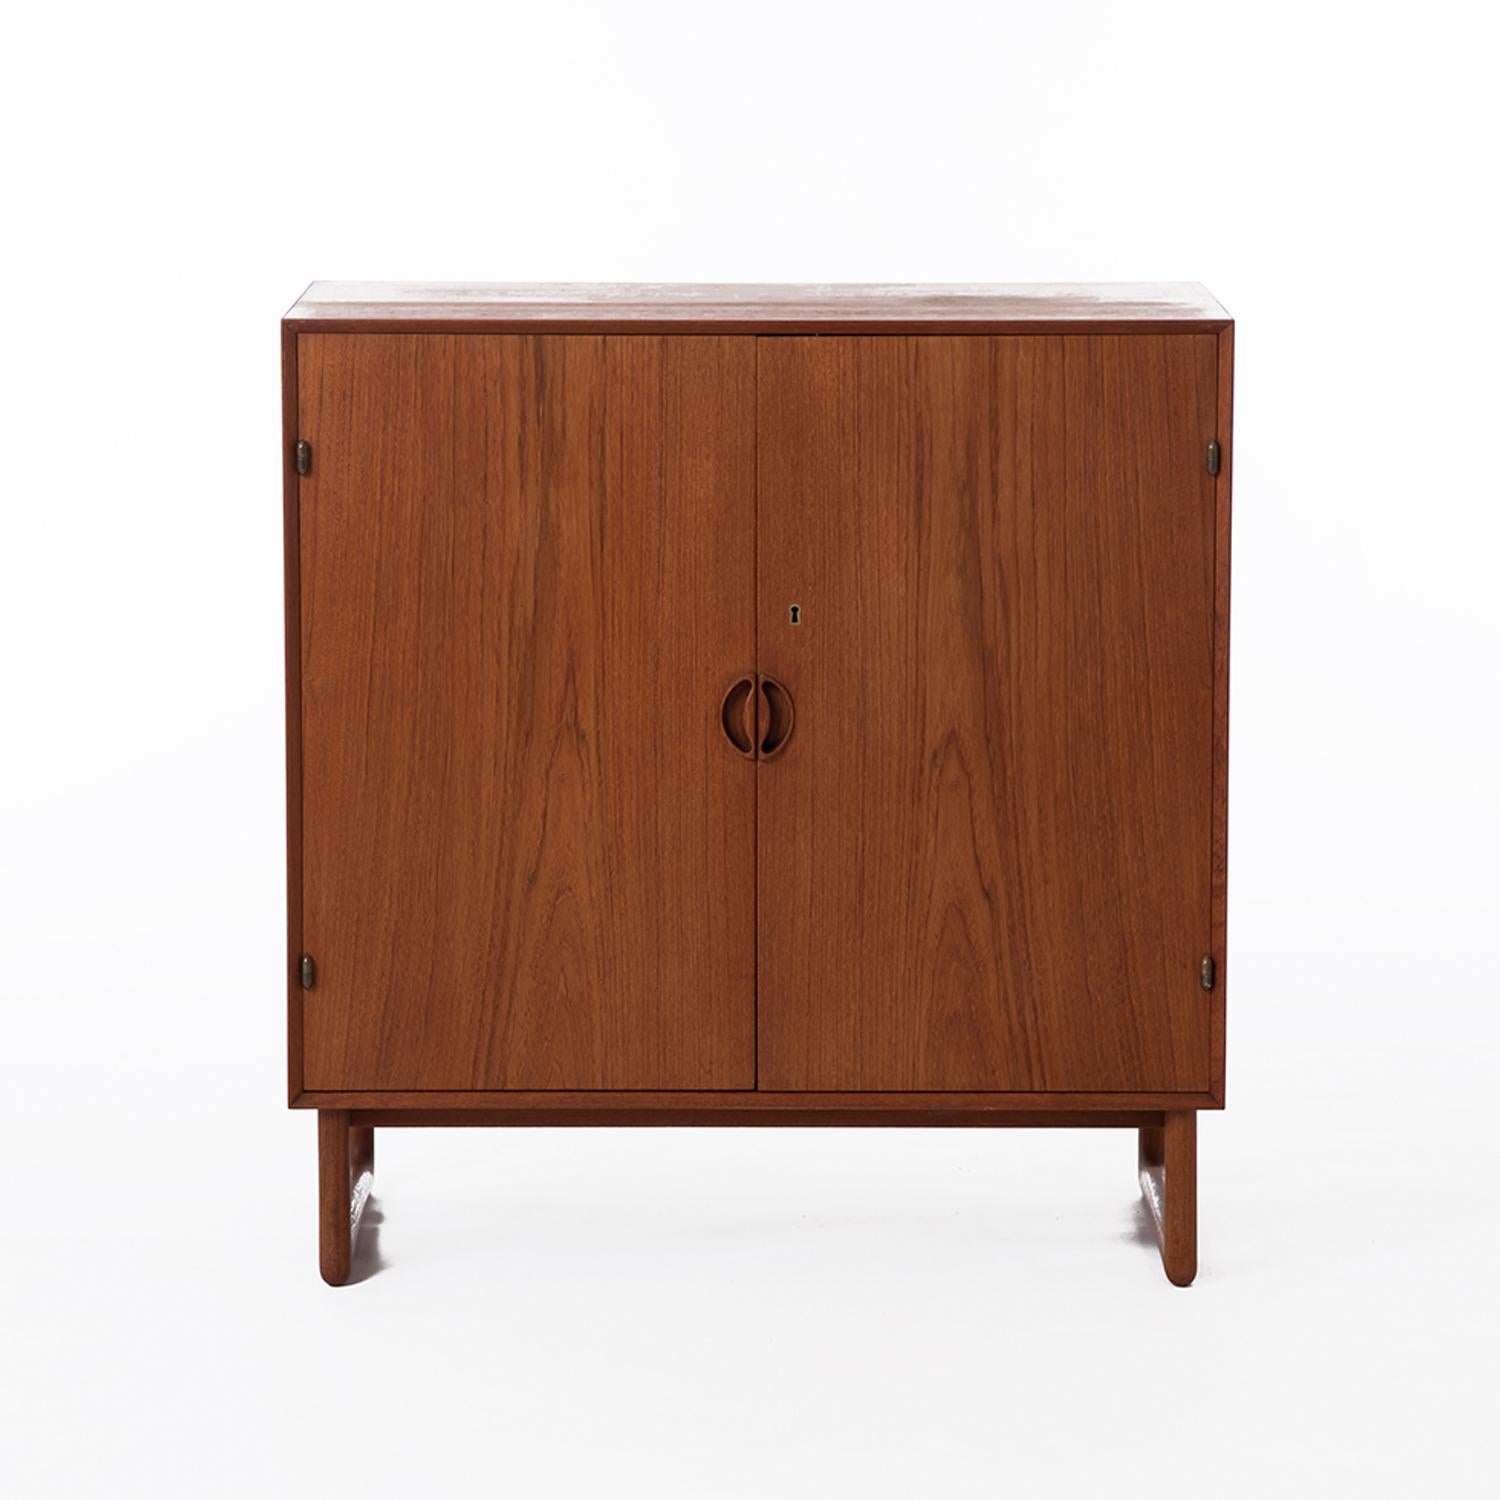 A Peter Hvidt and Orla Molgaard designed occasional cabinet. Solid teak construction with beautiful exposed joinery along the top and bottom of the case. Unusual sled base option. Interior adjustable shelving with locking door. 



Professional,